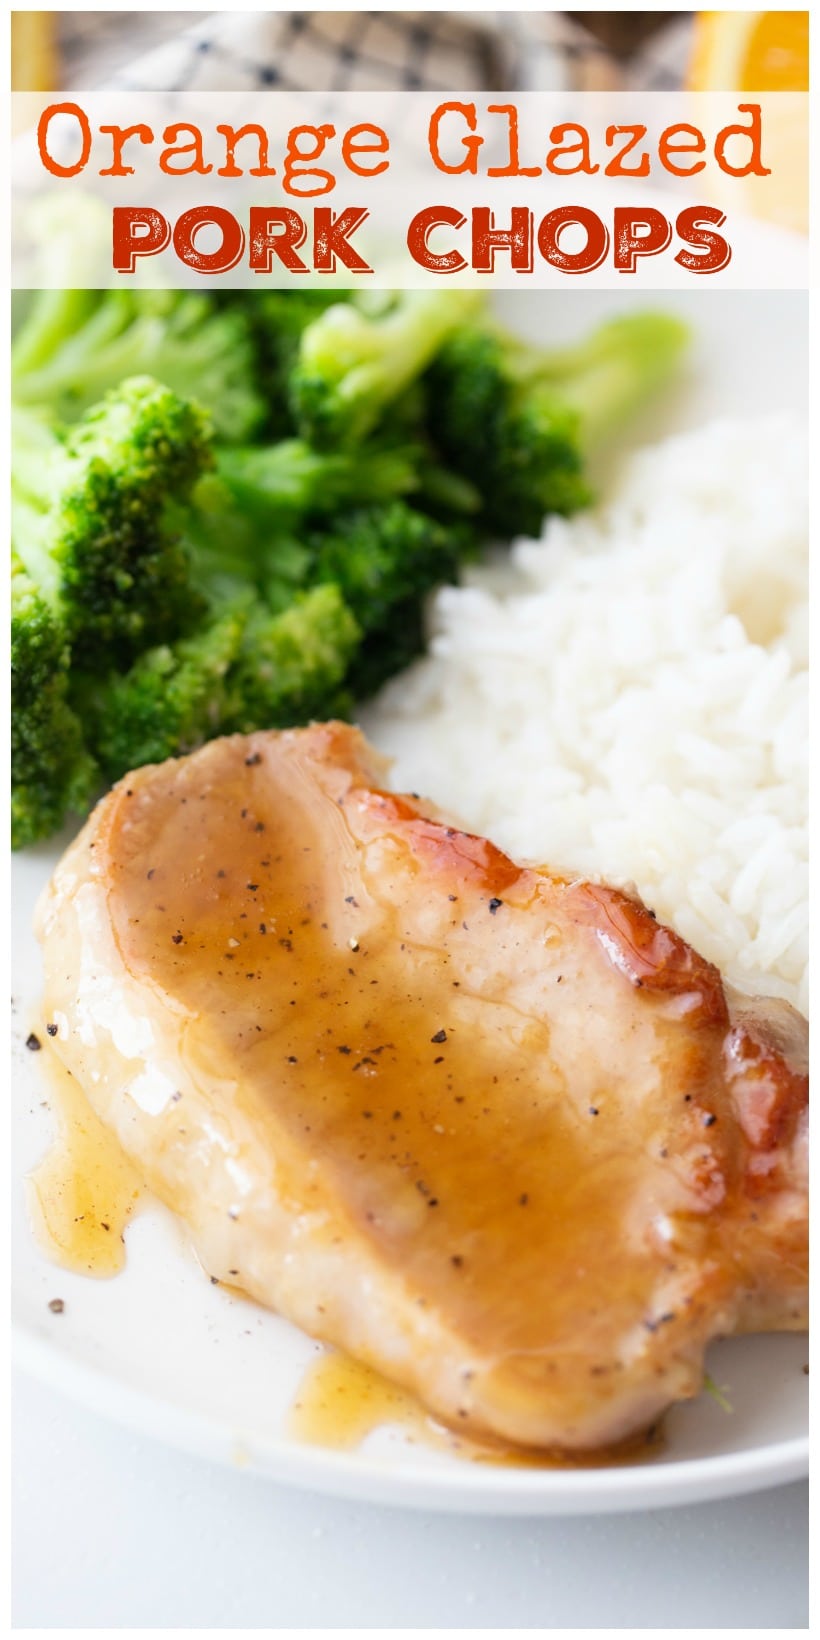 Glazed pork chop on a plate with rice and broccoli.